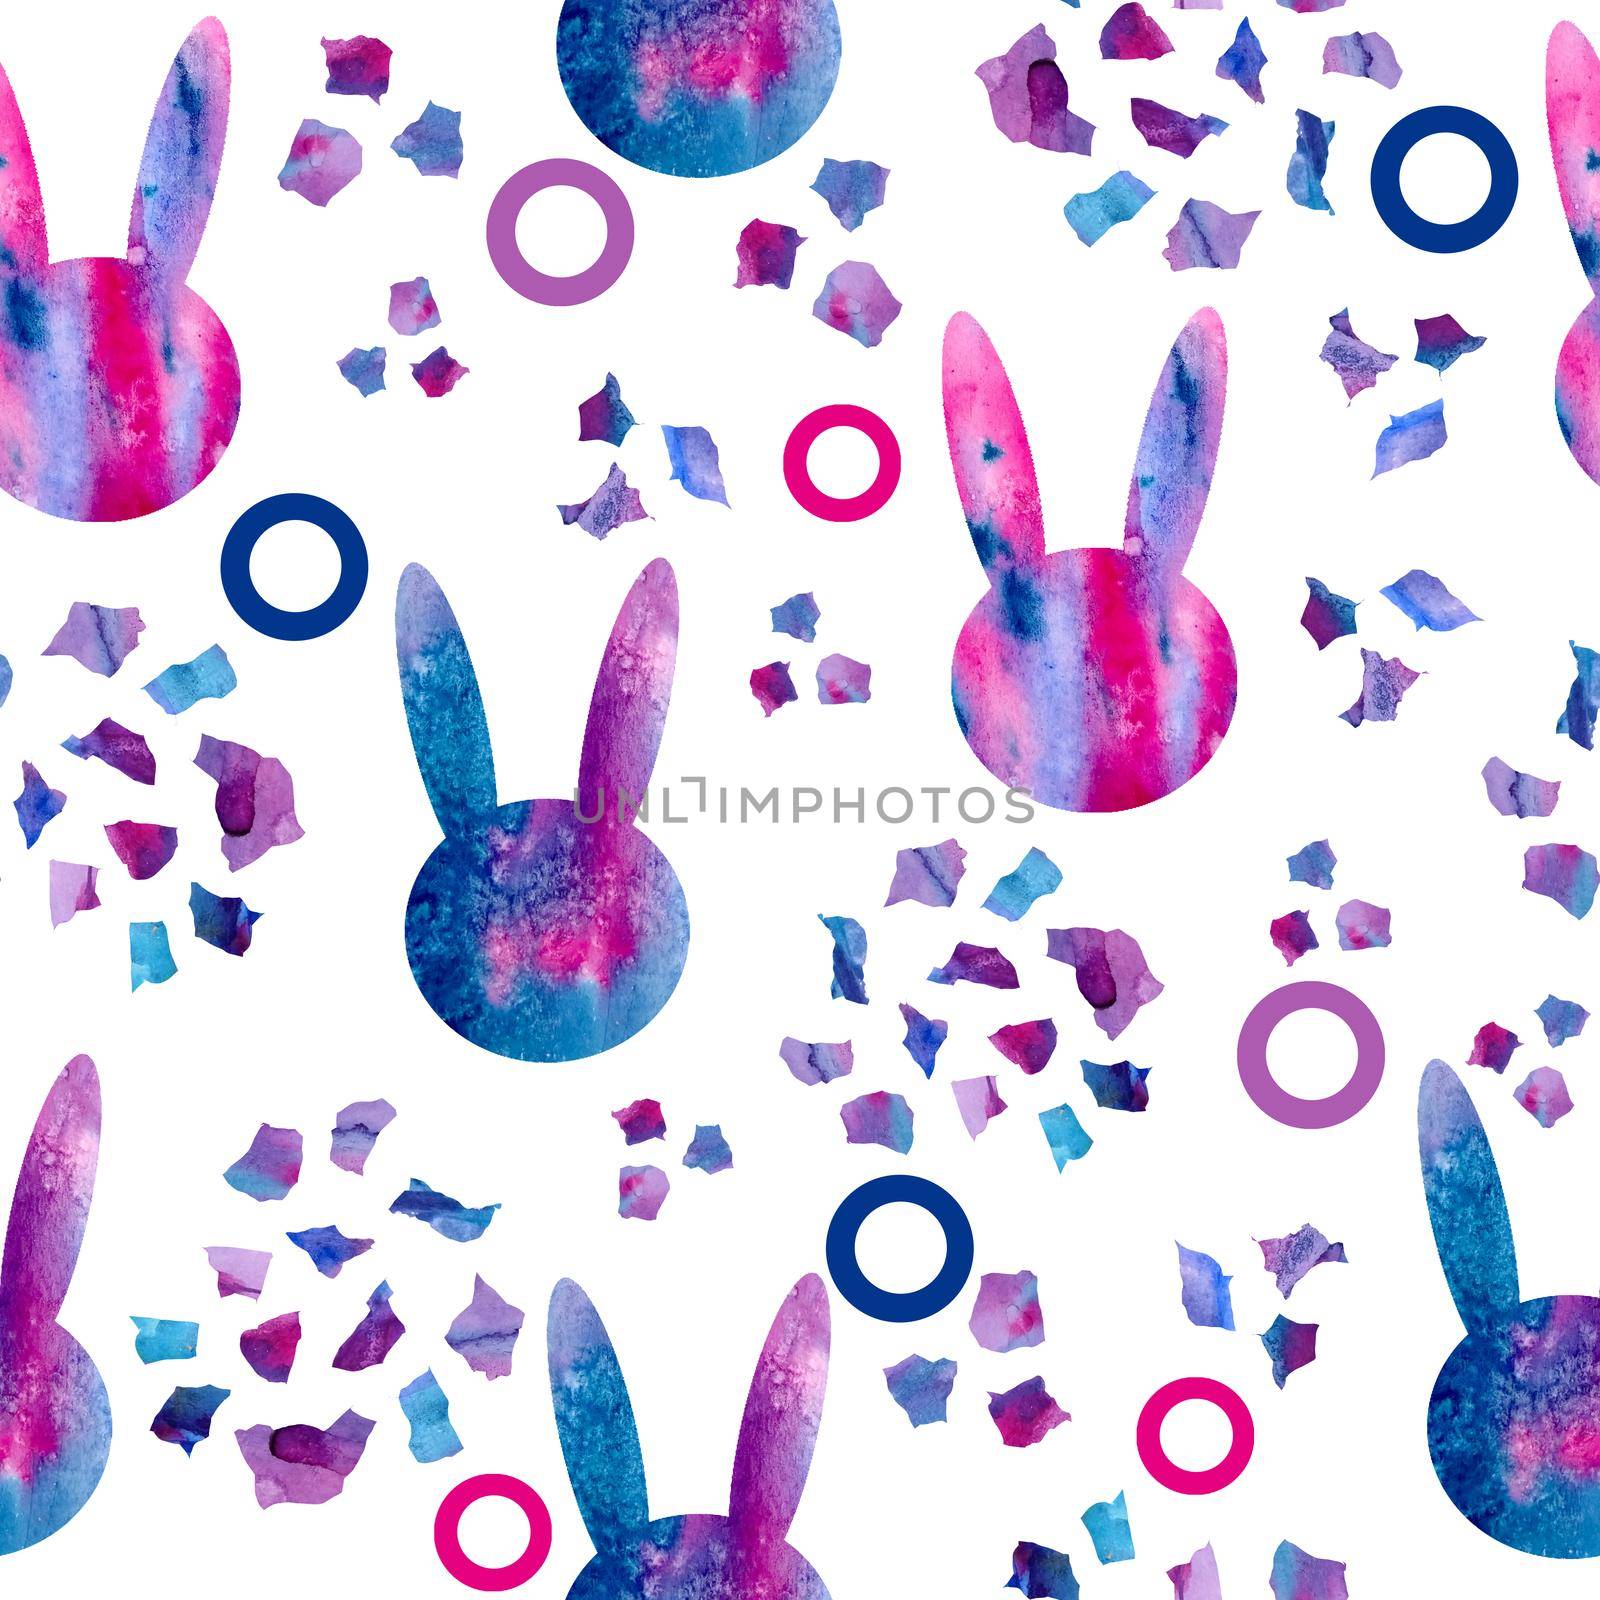 watercolor hand drawn seamless pattern illustration easter rabbits bunnies silhouette contour of abstract space galaxy lilac violet purple confetti blue background for easter spring holiday decoration by Lagmar